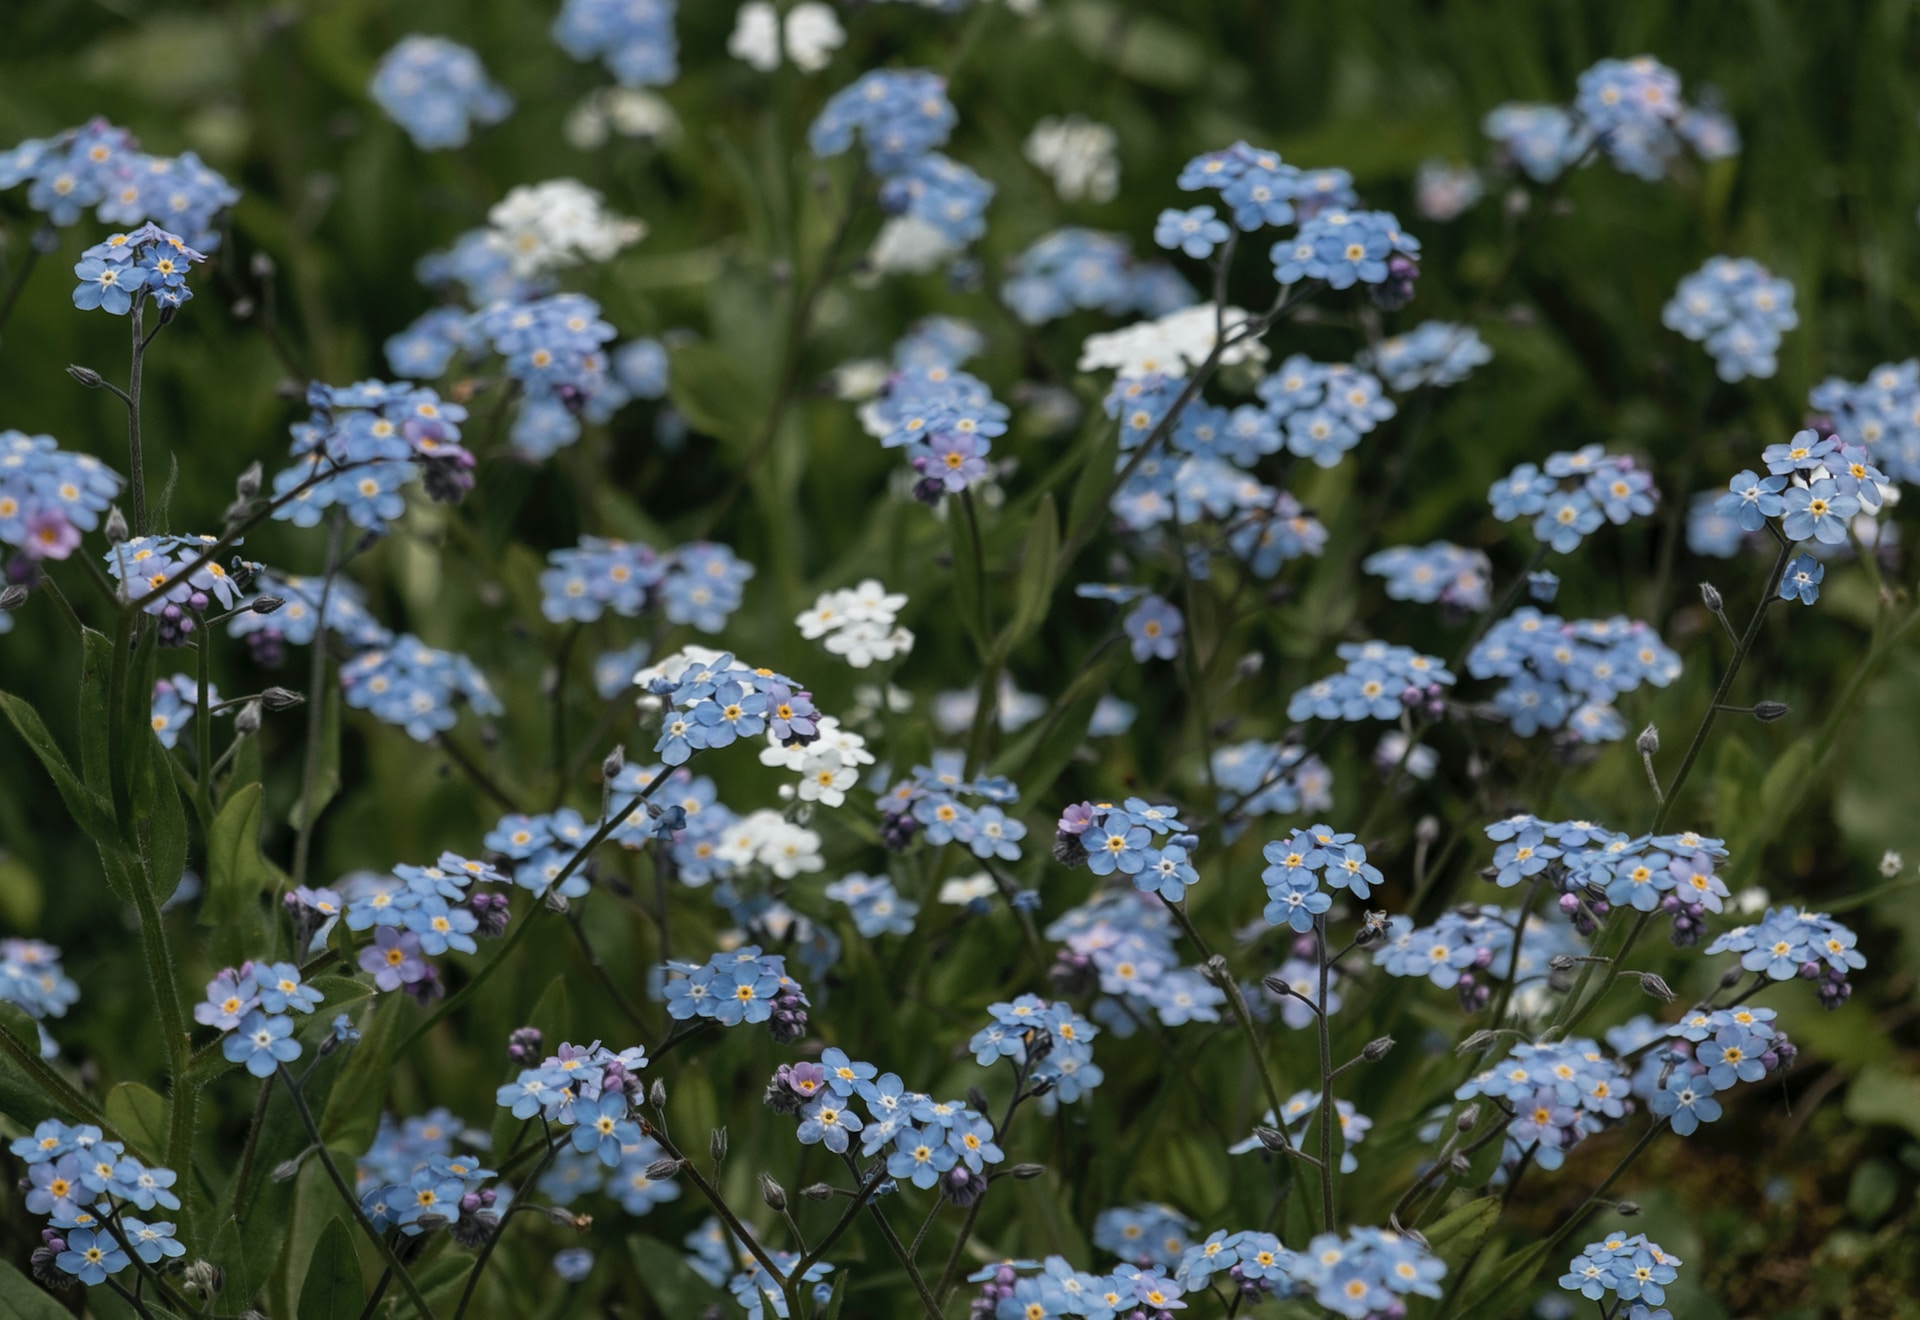 Forget me not flowers in a field. 